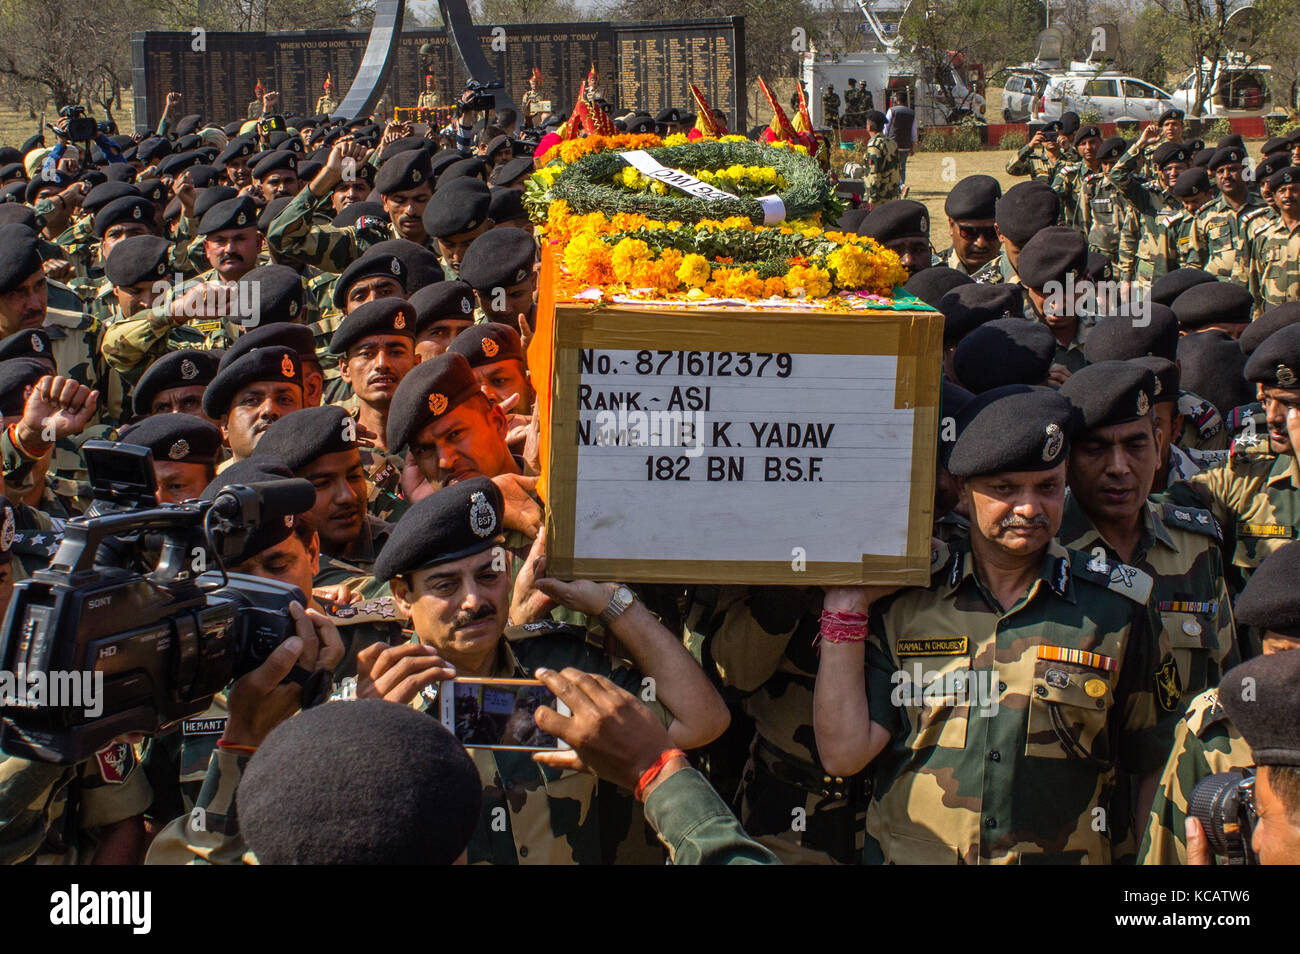 October 3, 2017 - Srinagar, Jammu and Kashmir, India - Indian Border Security Force (BSF) soldiers lay wreaths on the coffin containing the body of their officer killed in a gun battle with suspected militants at an Indian Border Security Force (BSF) camp on Tuesday, during a wreath laying ceremony, on October 04, 2017 in Srinagar, the summer capital of Indian administered Kashmir, India. A wreath laying ceremony was held today for an Indian Indian Border Security Force (BSF) officer who was killed on Tuesday in a gun battle after suspected militants attacked their camp in Srinagar outskirt Stock Photo